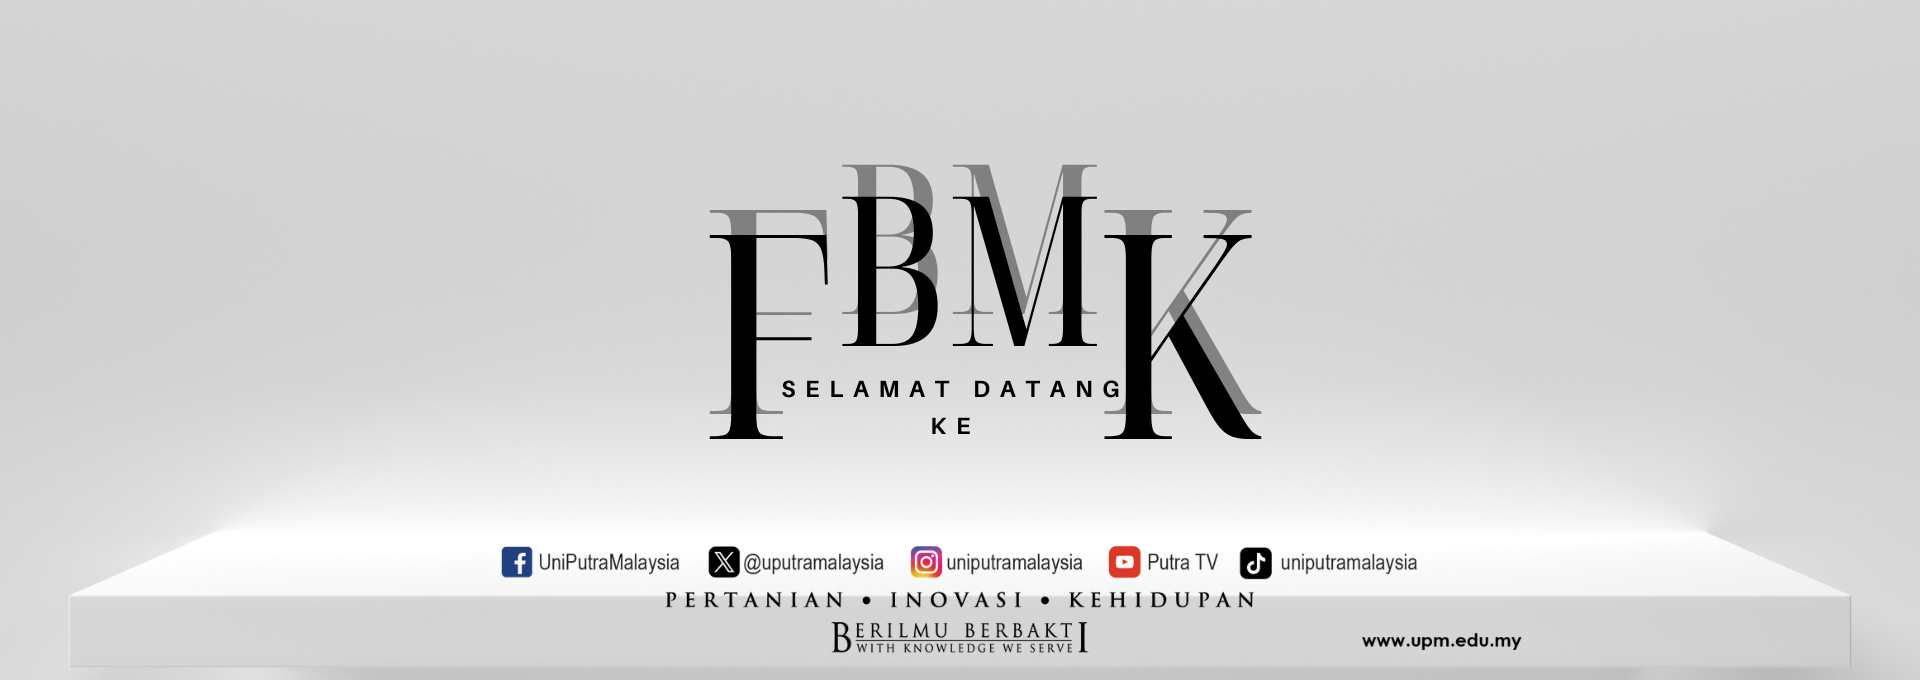 WELCOME TO FBMK